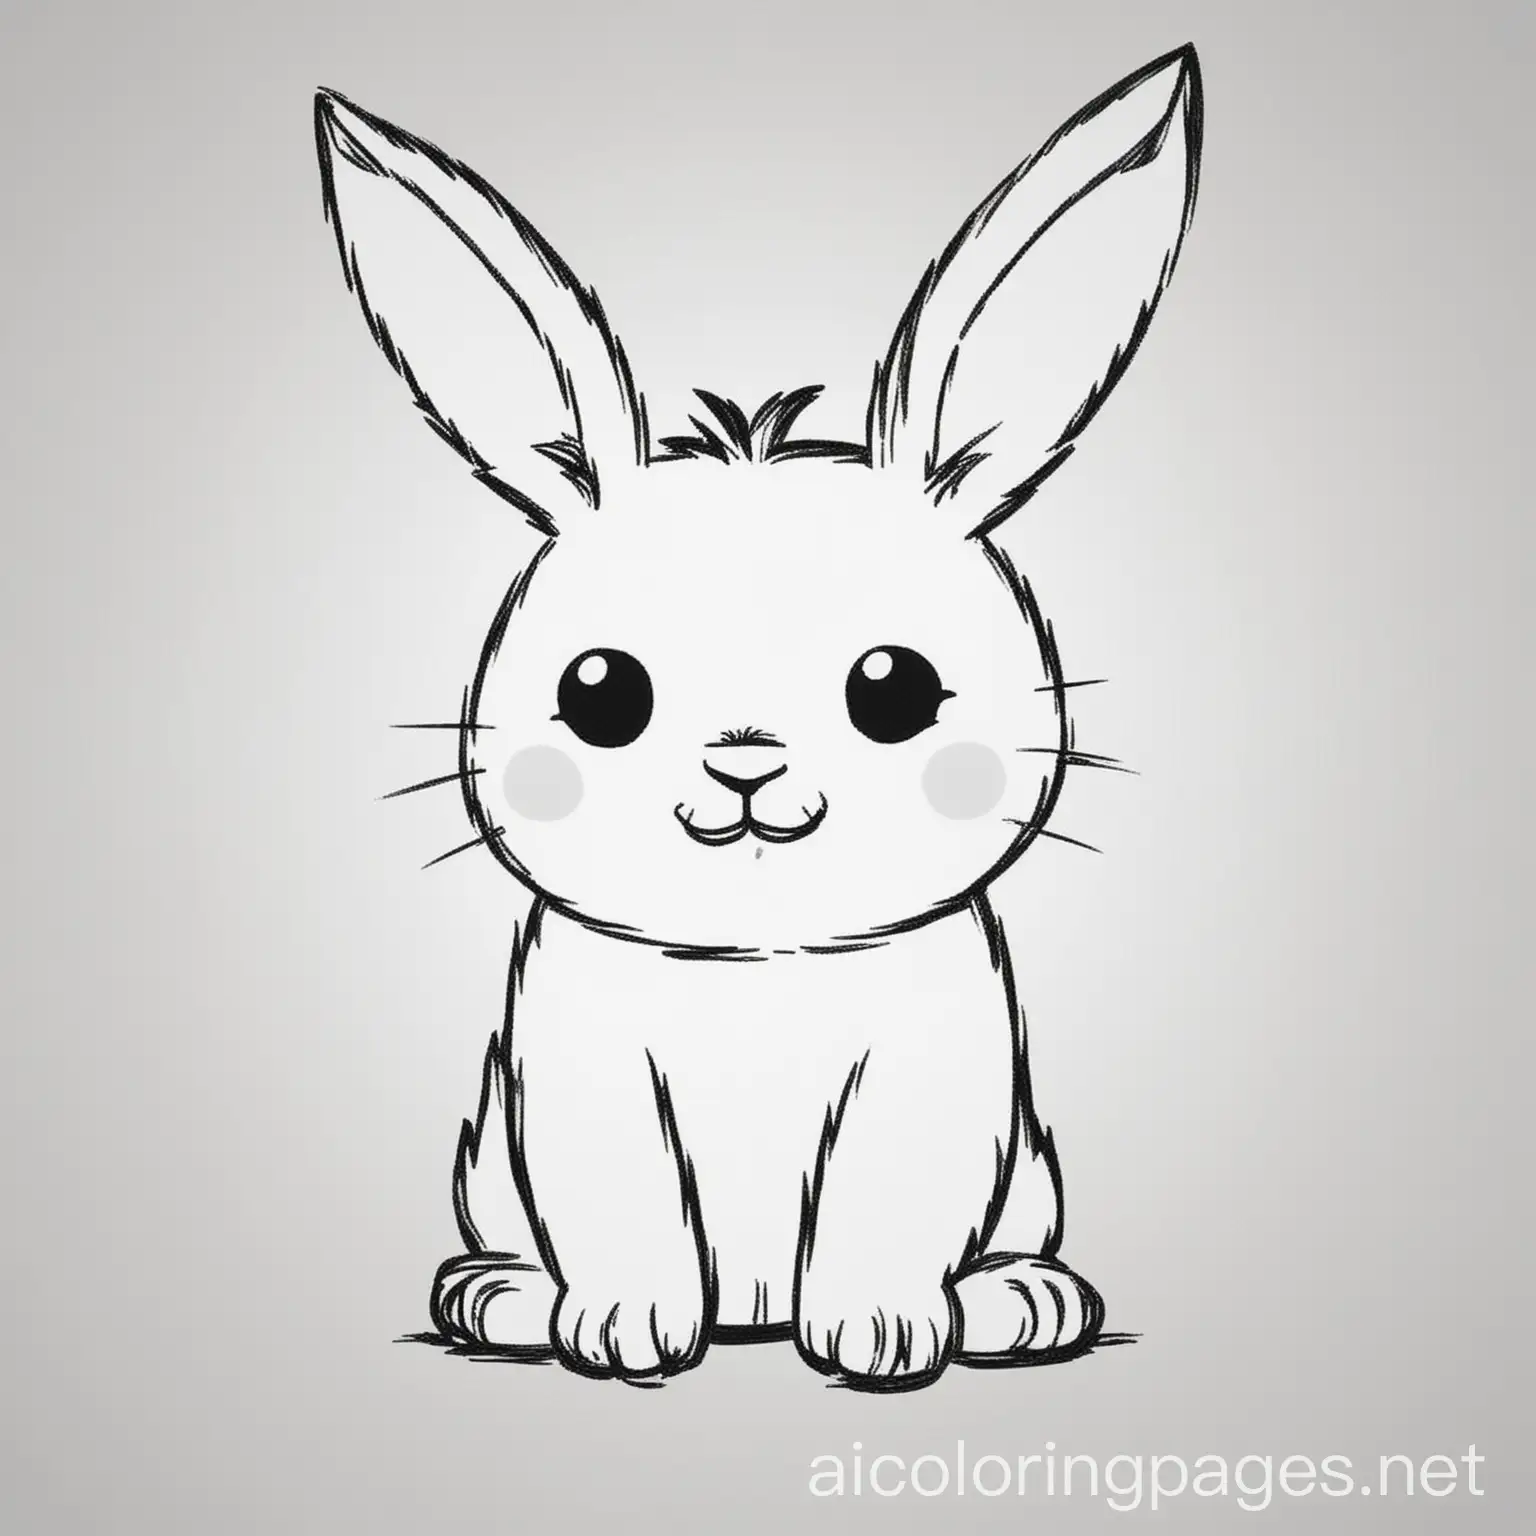 rabbit, coloring page, black and white, center with ample space, Coloring Page, black and white, line art, white background, Simplicity, Ample White Space. The background of the coloring page is plain white to make it easy for young children to color within the lines. The outlines of all the subjects are easy to distinguish, making it simple for kids to color without too much difficulty